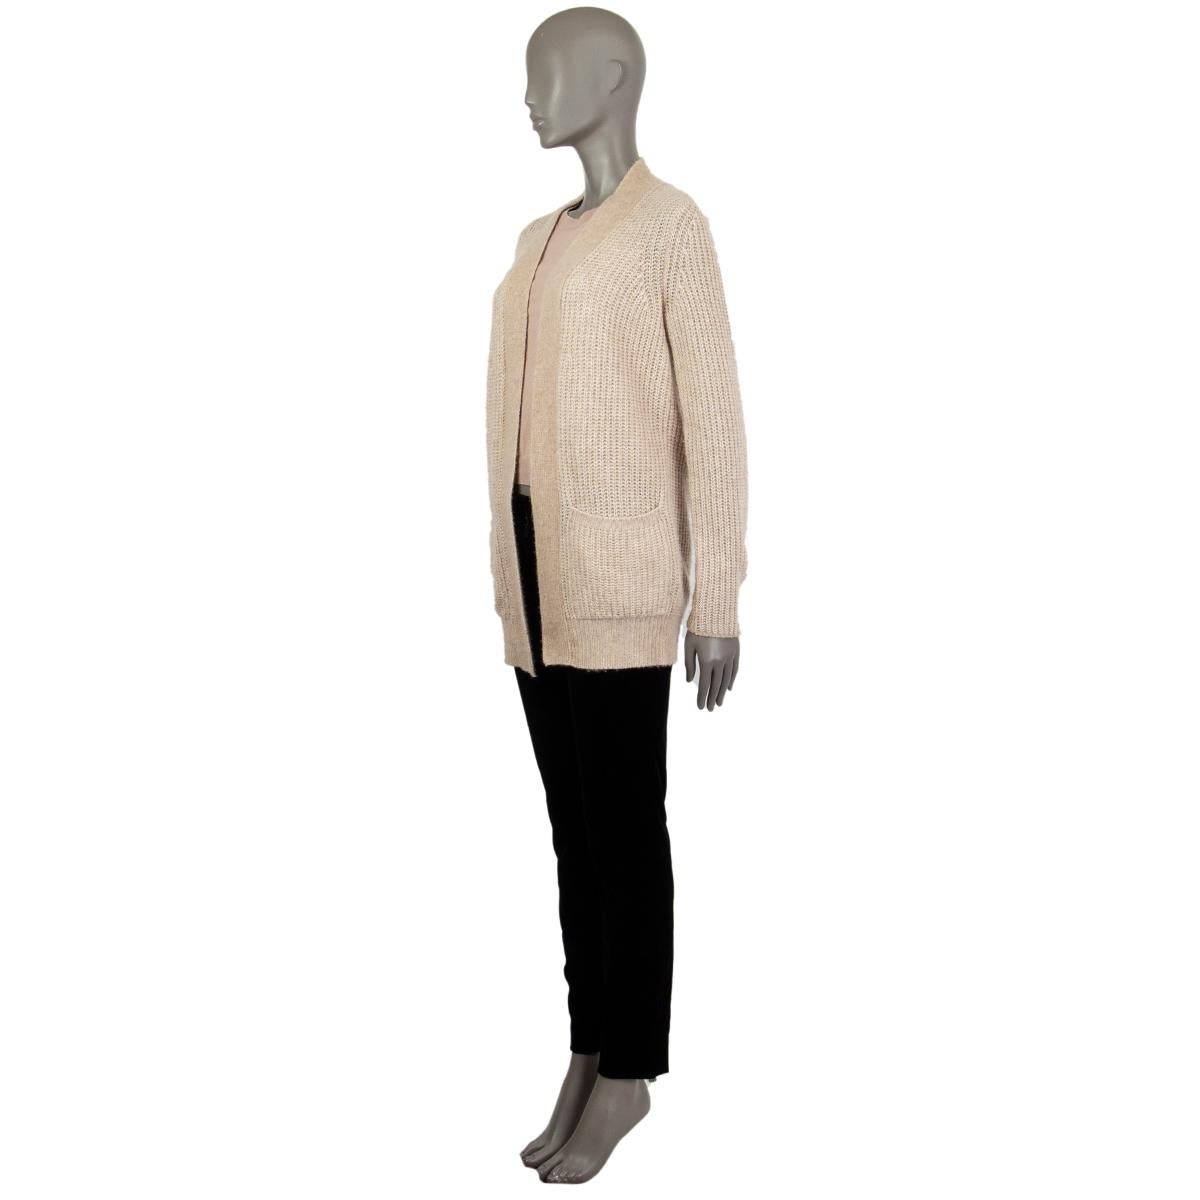 Loro Piana open front classic cardigan in oatmeal cashmere (78%) and silk (22%) with two front pockets. Unlined. Has been worn and is in excellent condition. 

Tag Size 38
Size XS
Shoulder Width 40cm (15.6in)
Bust 92cm (35.9in) to 96cm